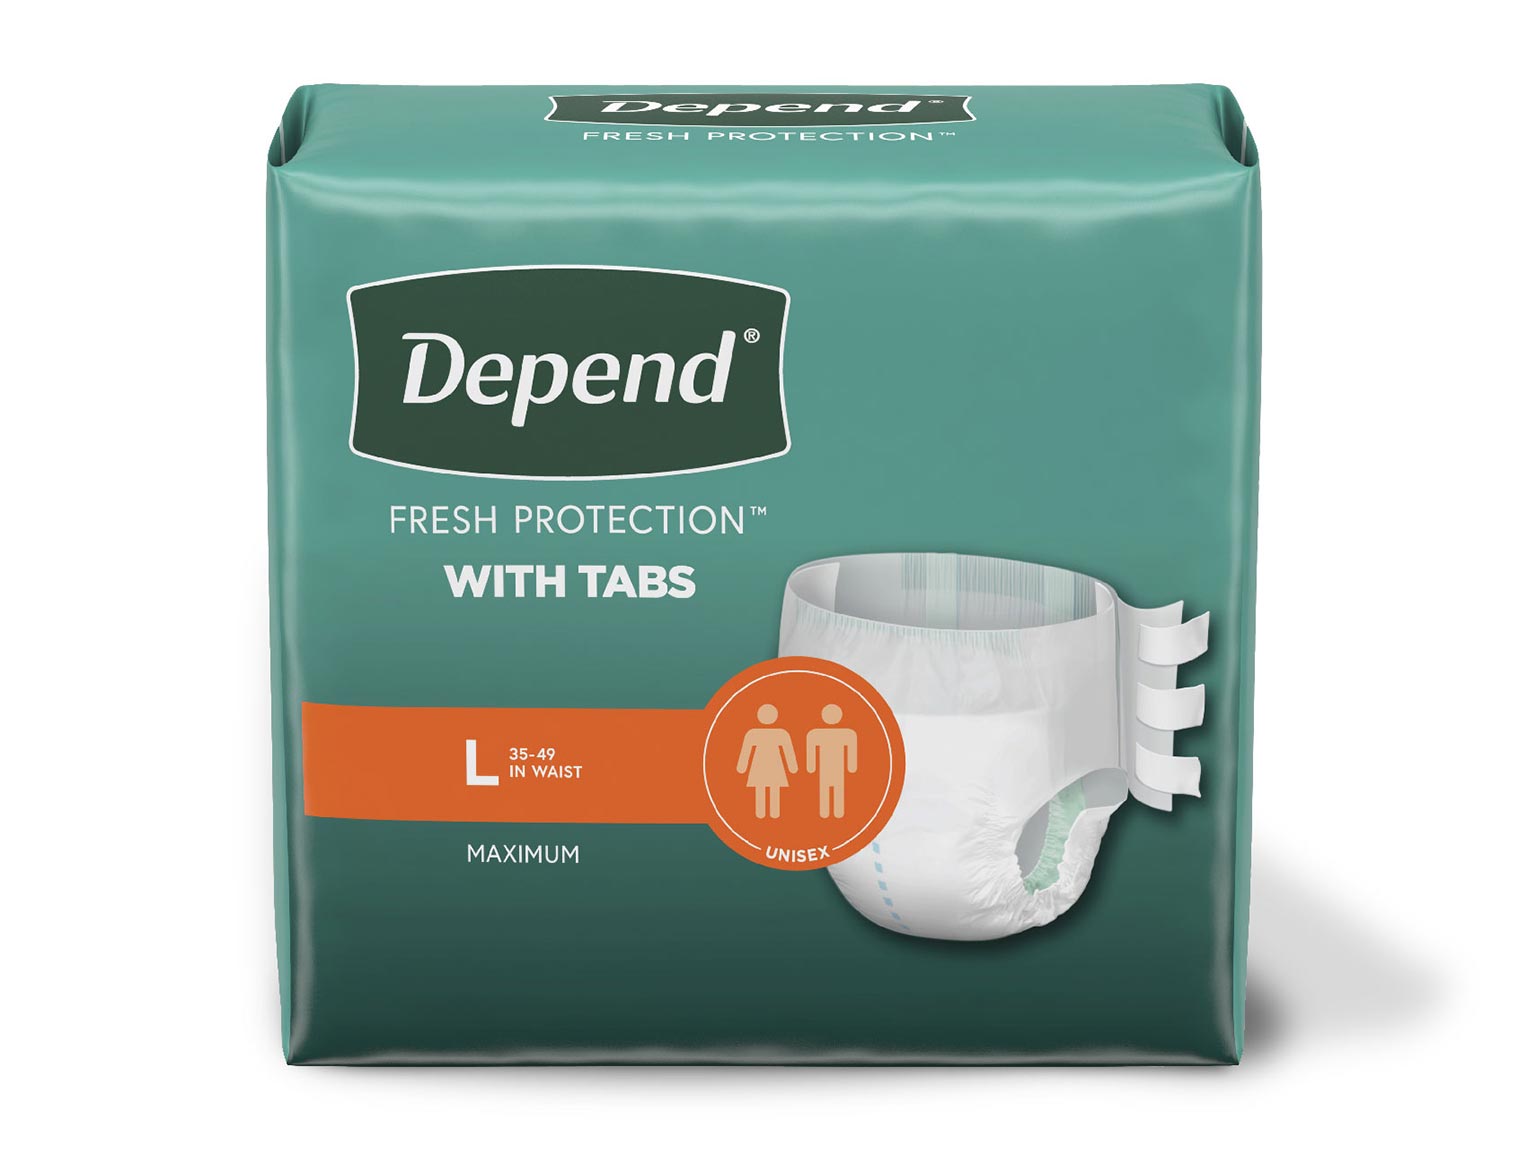 Adult Incontinence Products: What's the Best Product for Urinary